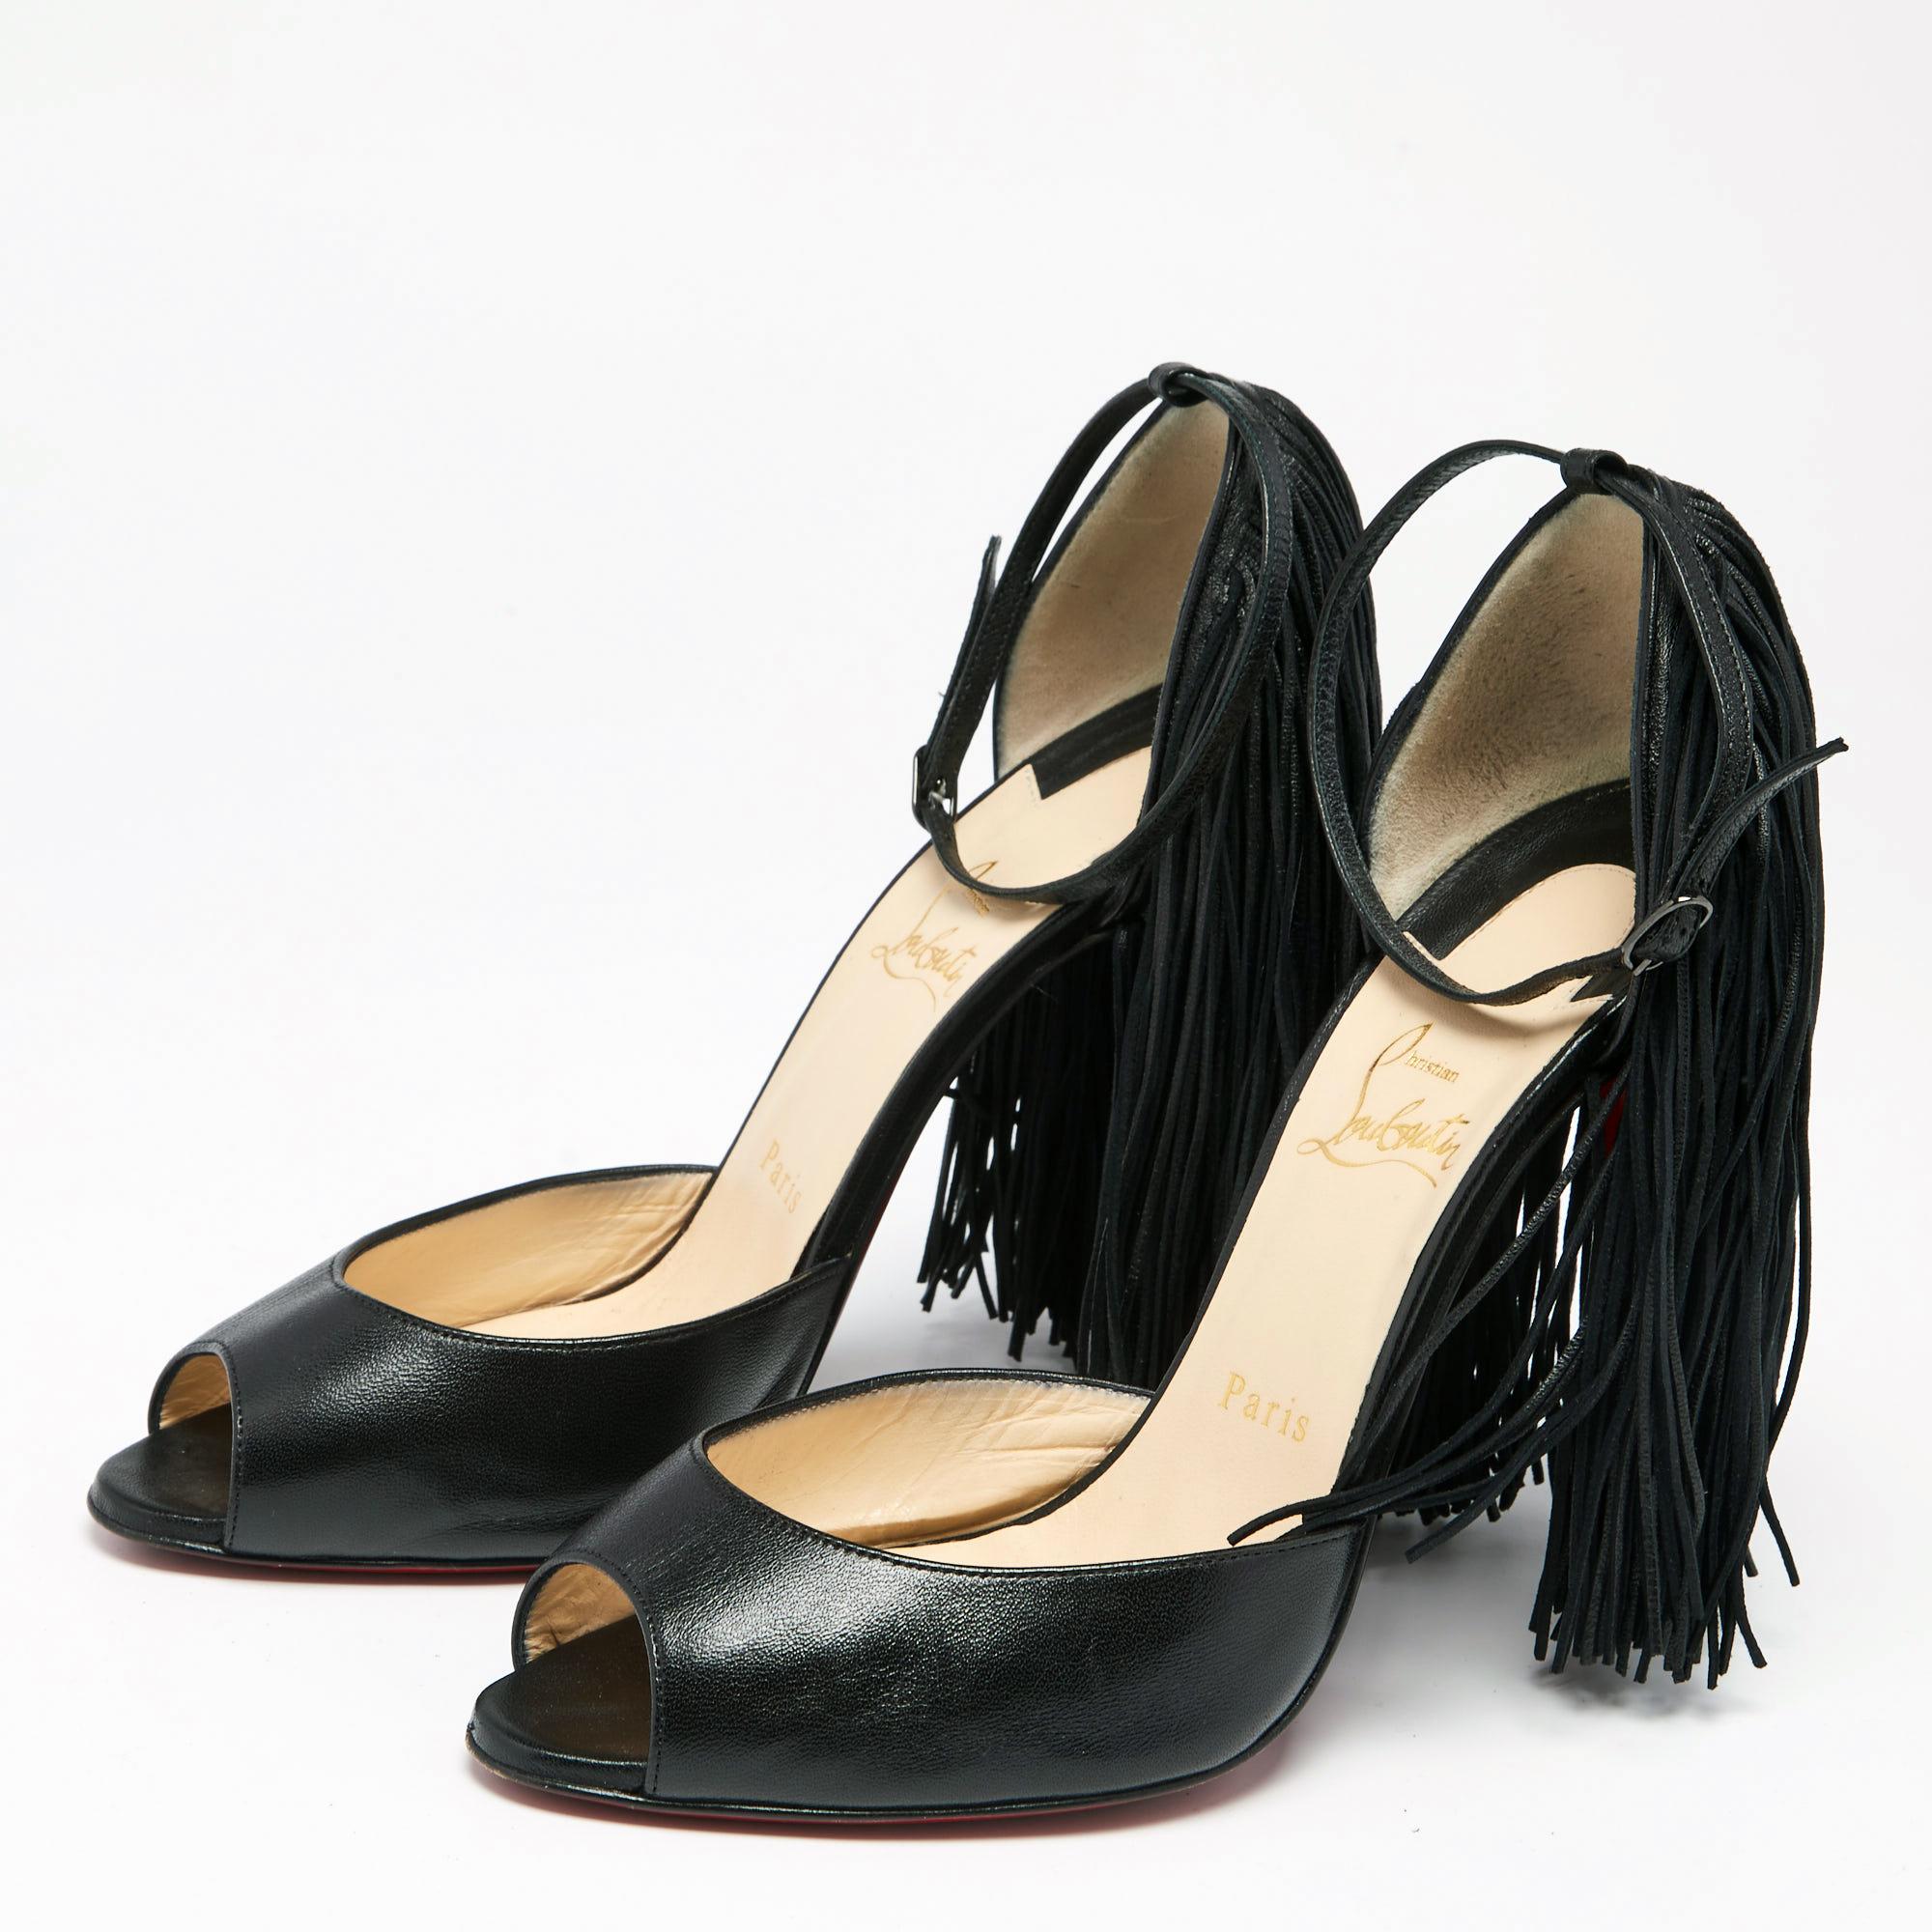 One of the most celebrated fashion houses, the Parisian label Christian Louboutin is known for its brilliant craftsmanship in shoemaking. These Otrot sandals are highlighted with playful fringes on the counters that veil the 12.5 cm high heels. They